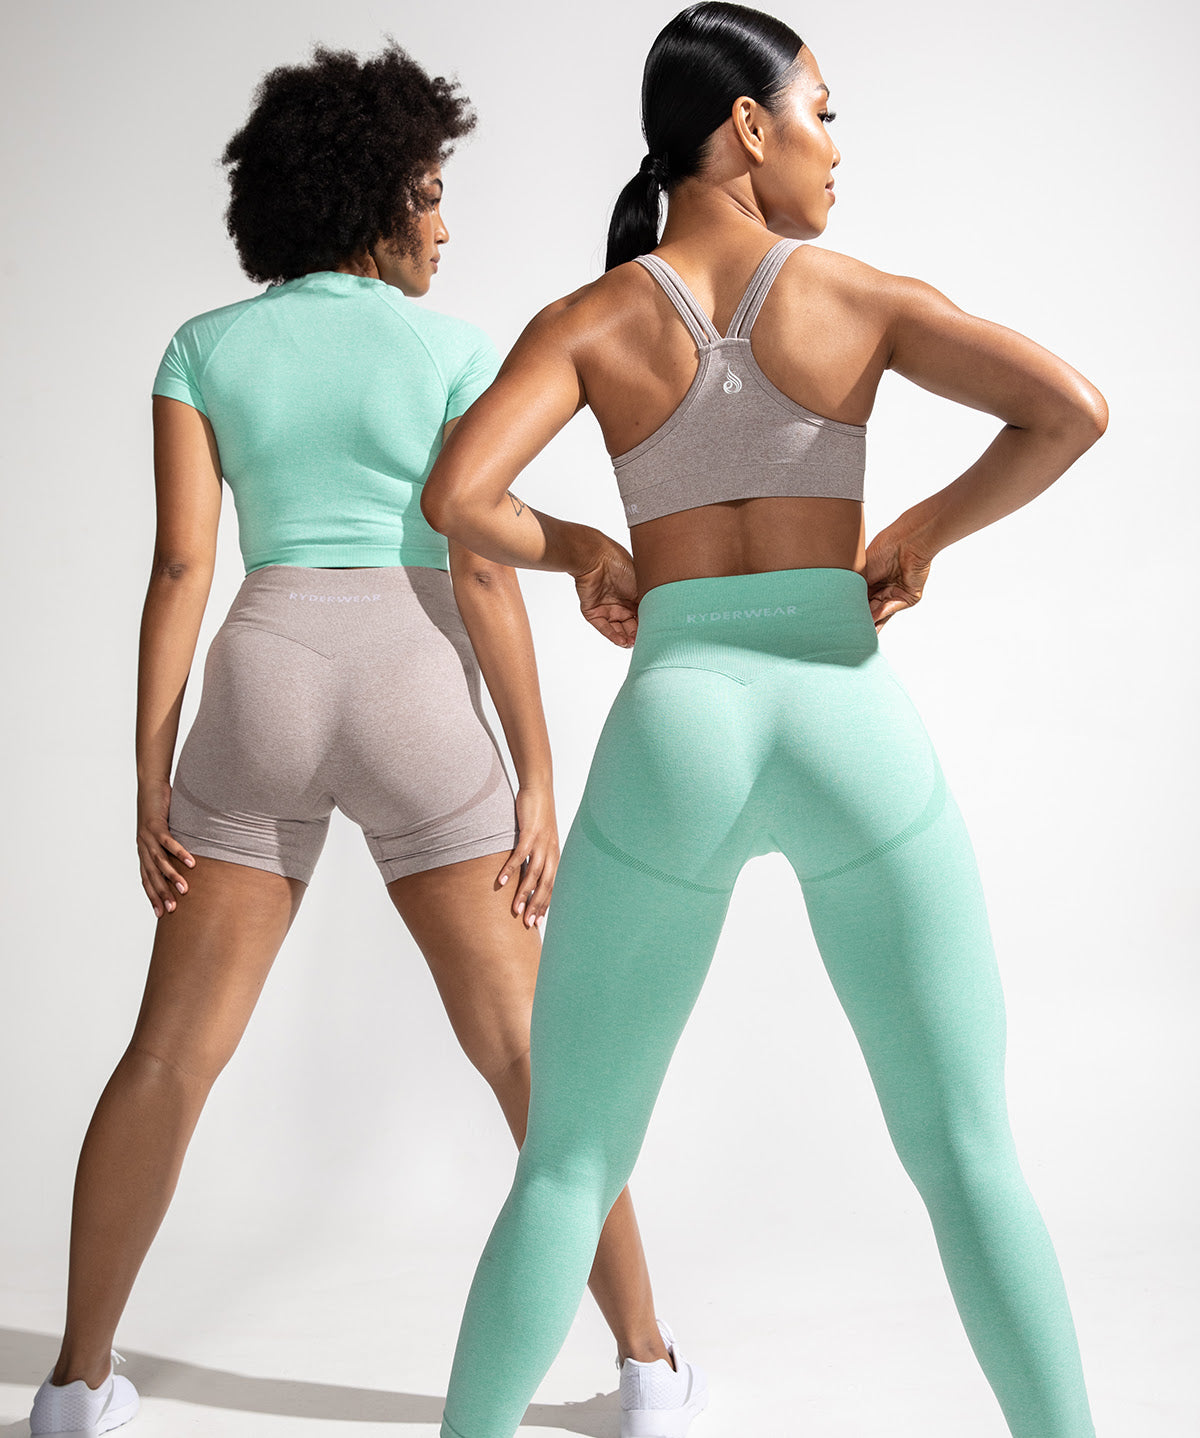 Leggings vs. Shorts: Which is Better to Wear When Working Out?